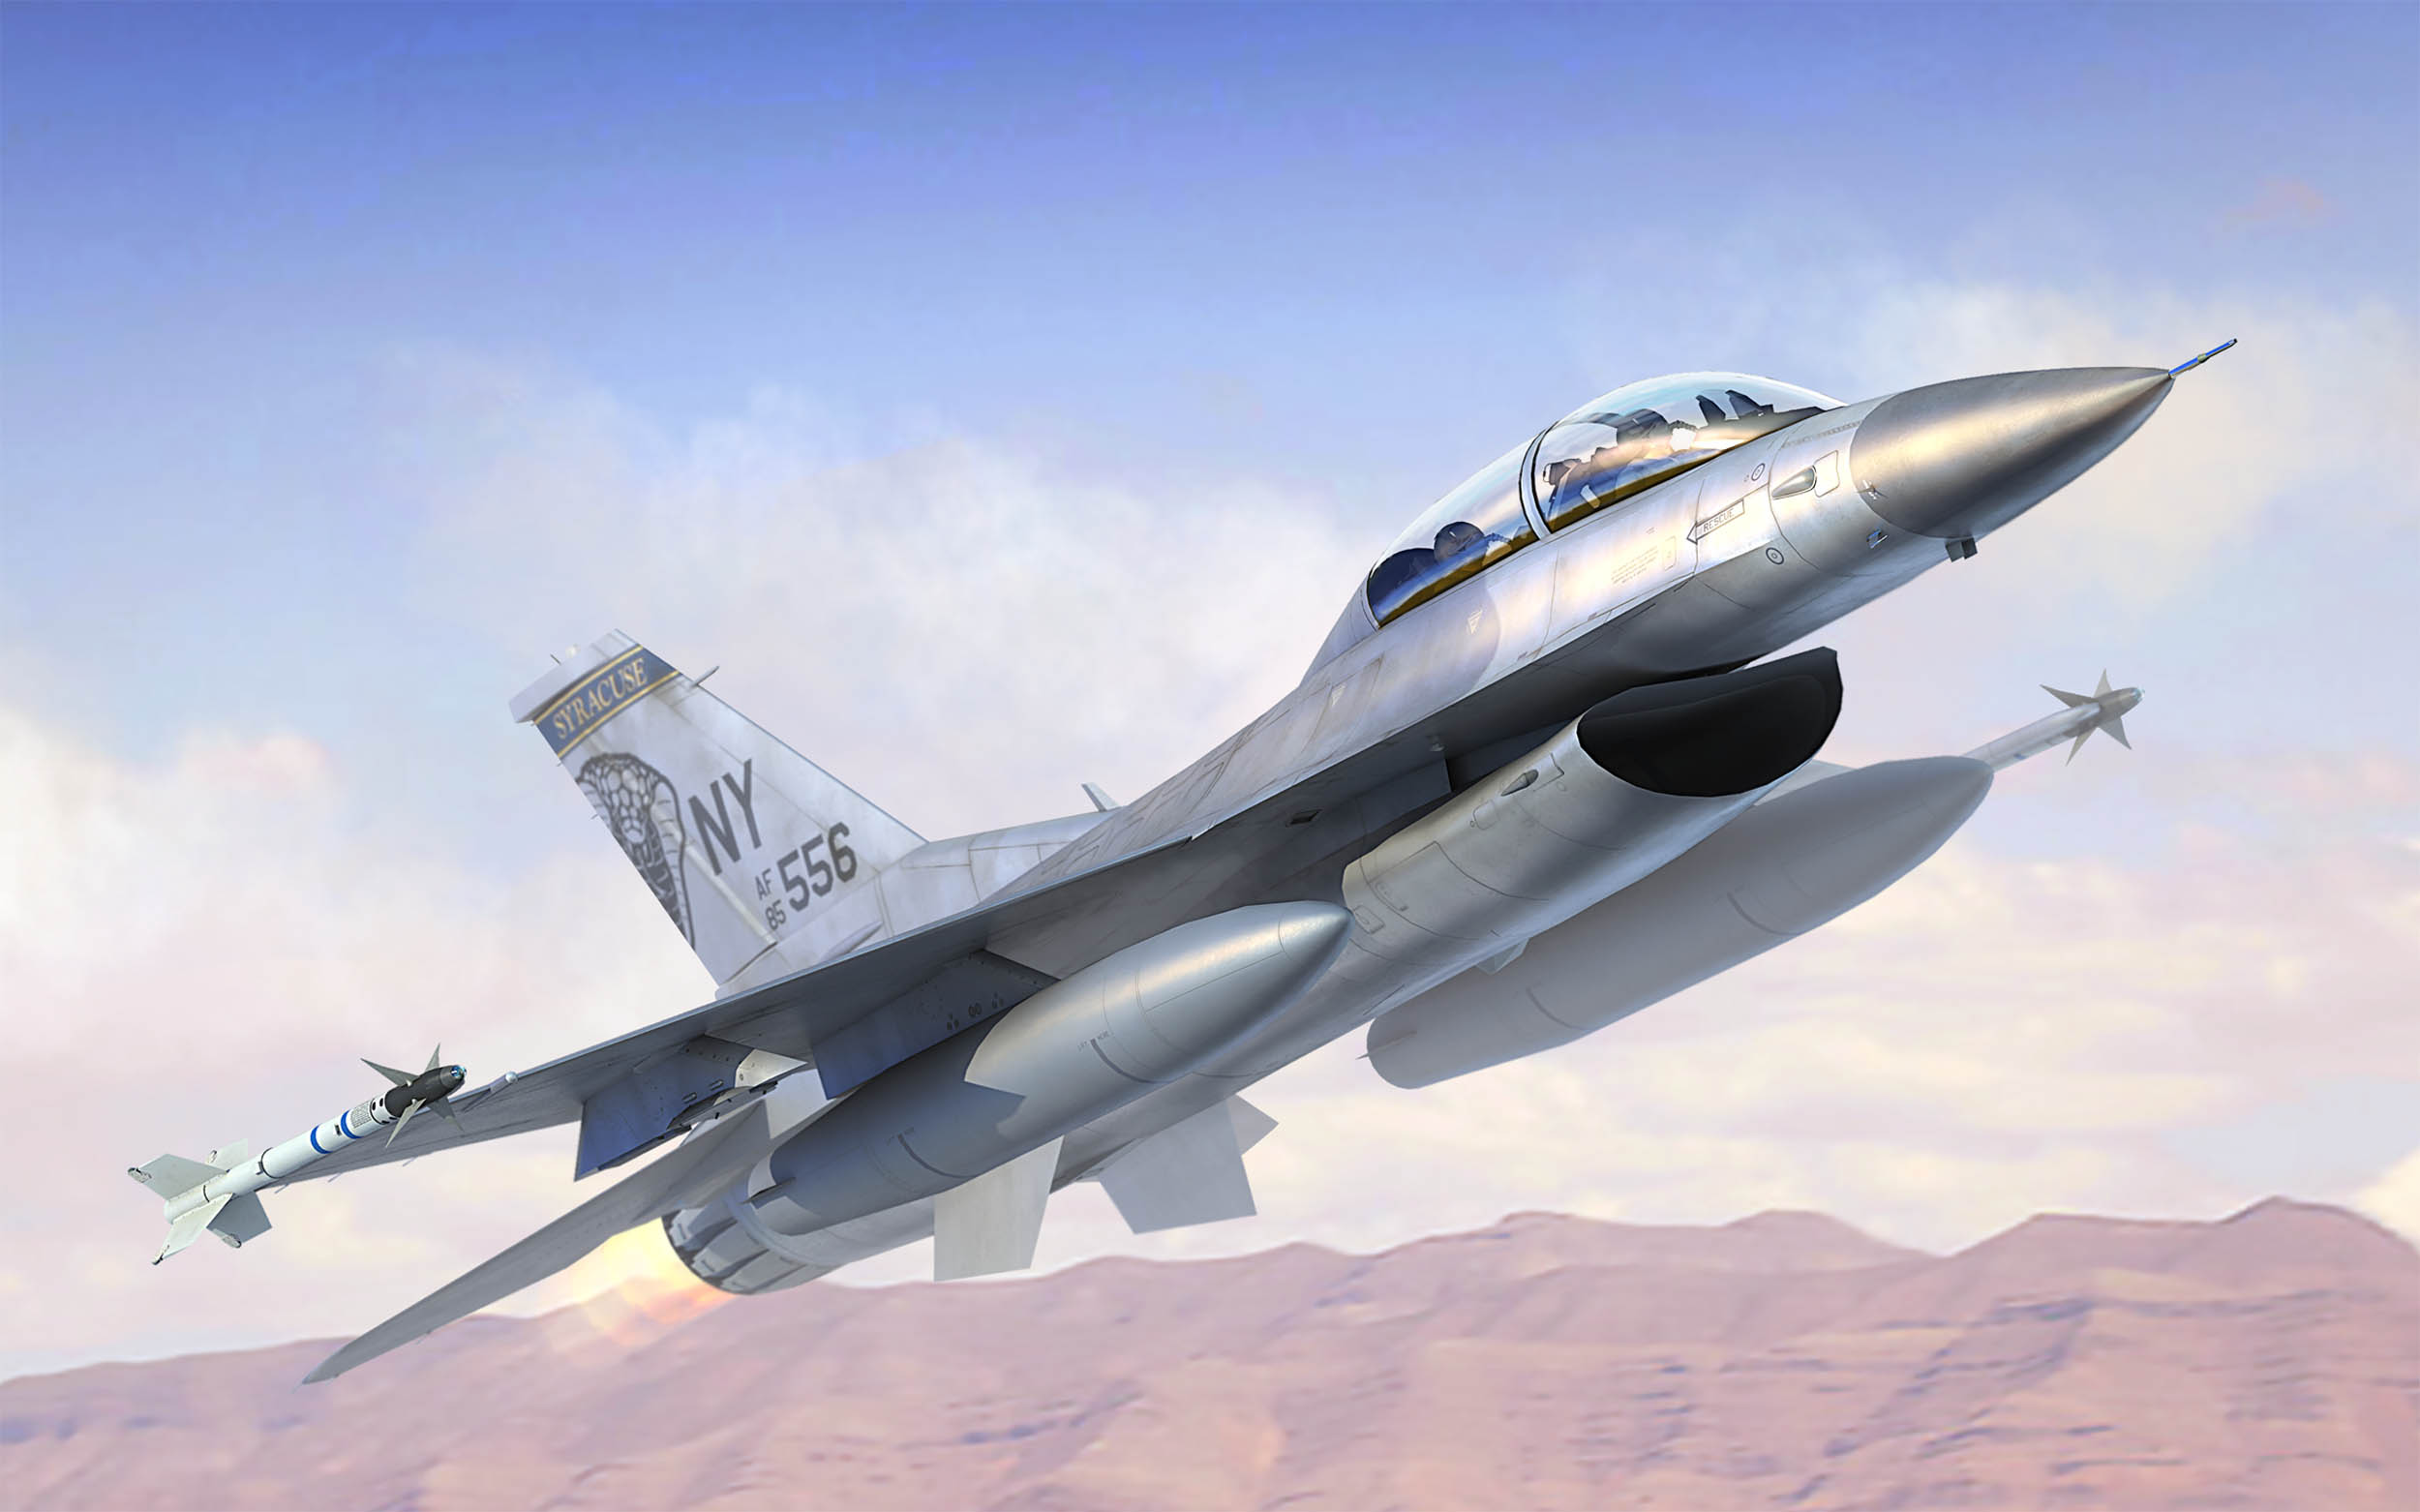 General 2500x1562 aircraft military flying rocket sky artwork military vehicle pilot clouds missiles General Dynamics F-16 Fighting Falcon US Air Force jet fighter New York state propaganda